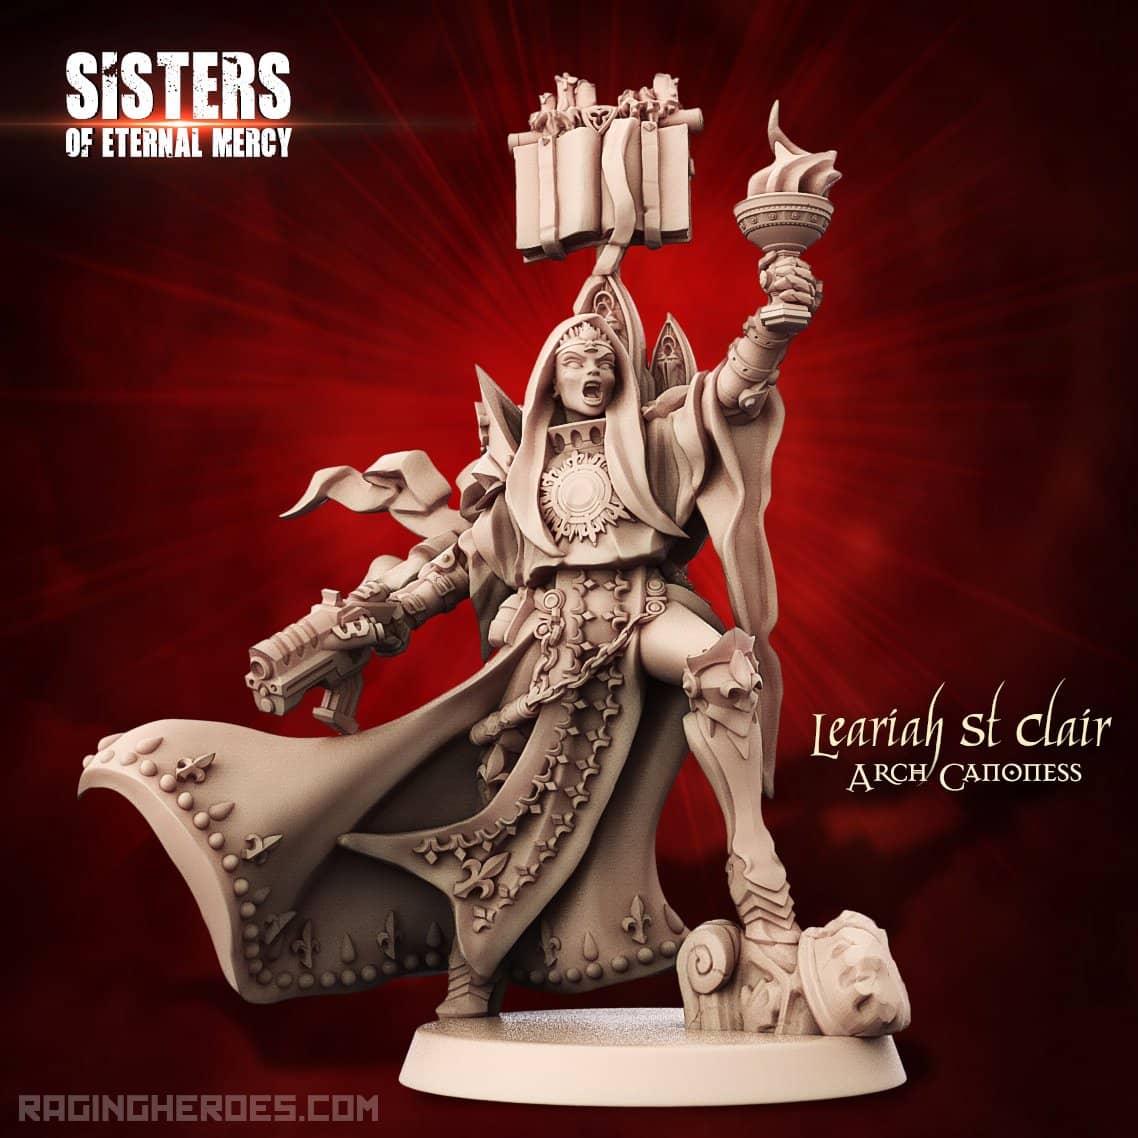 Leariah St Clair, Arch Canoness (SoEM - SF) - Raging Heroes